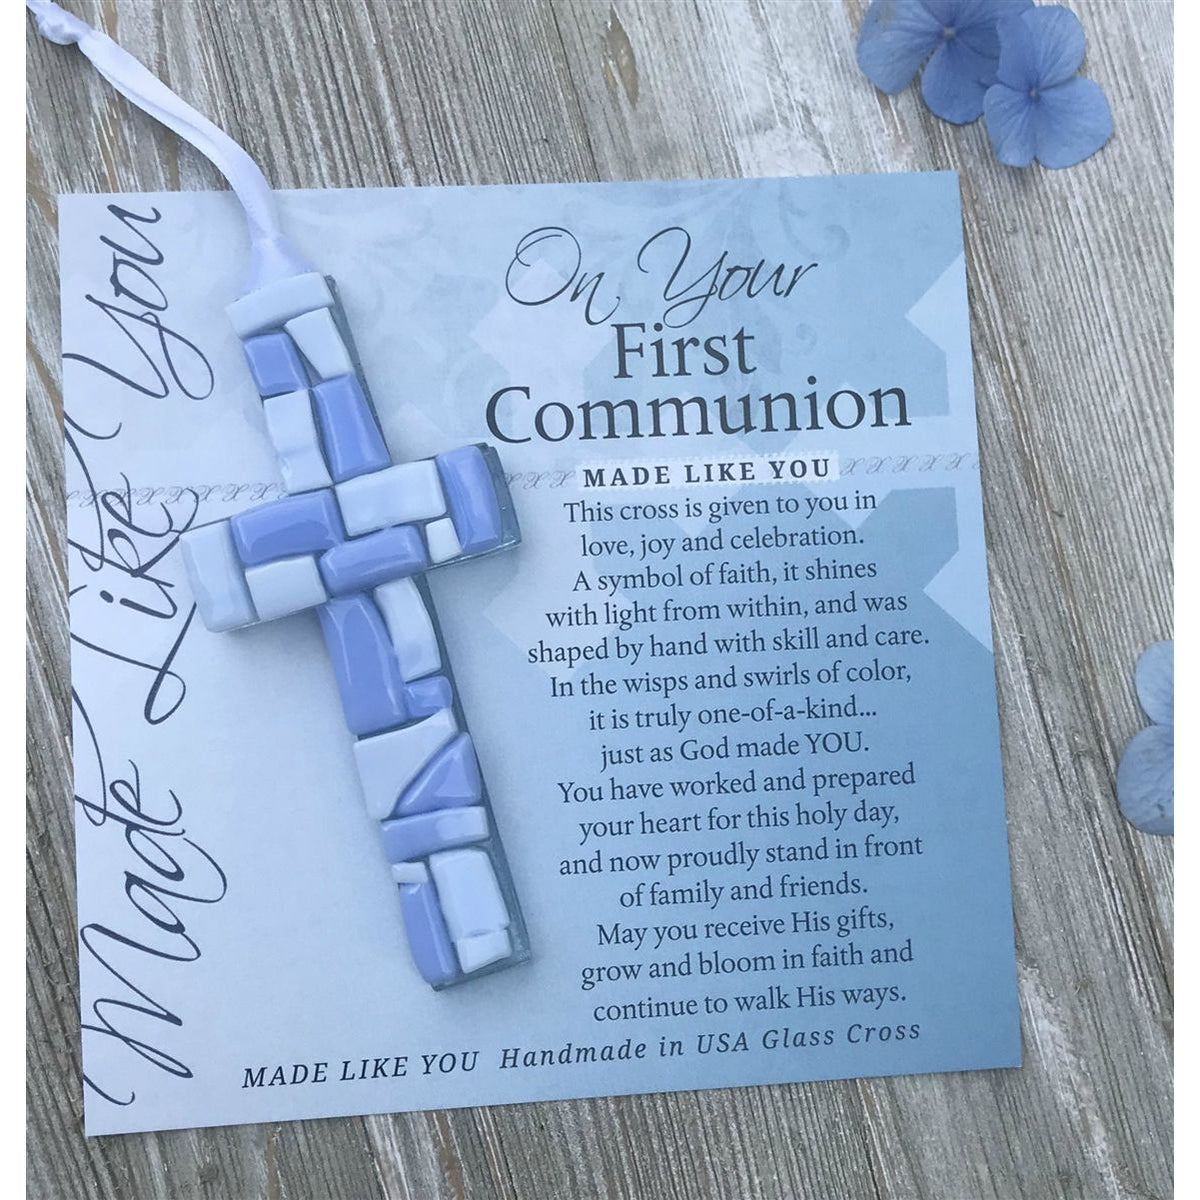 Blue Mosaic cross with shades of blue and white lying on the On Your First Communion sentiment artwork.